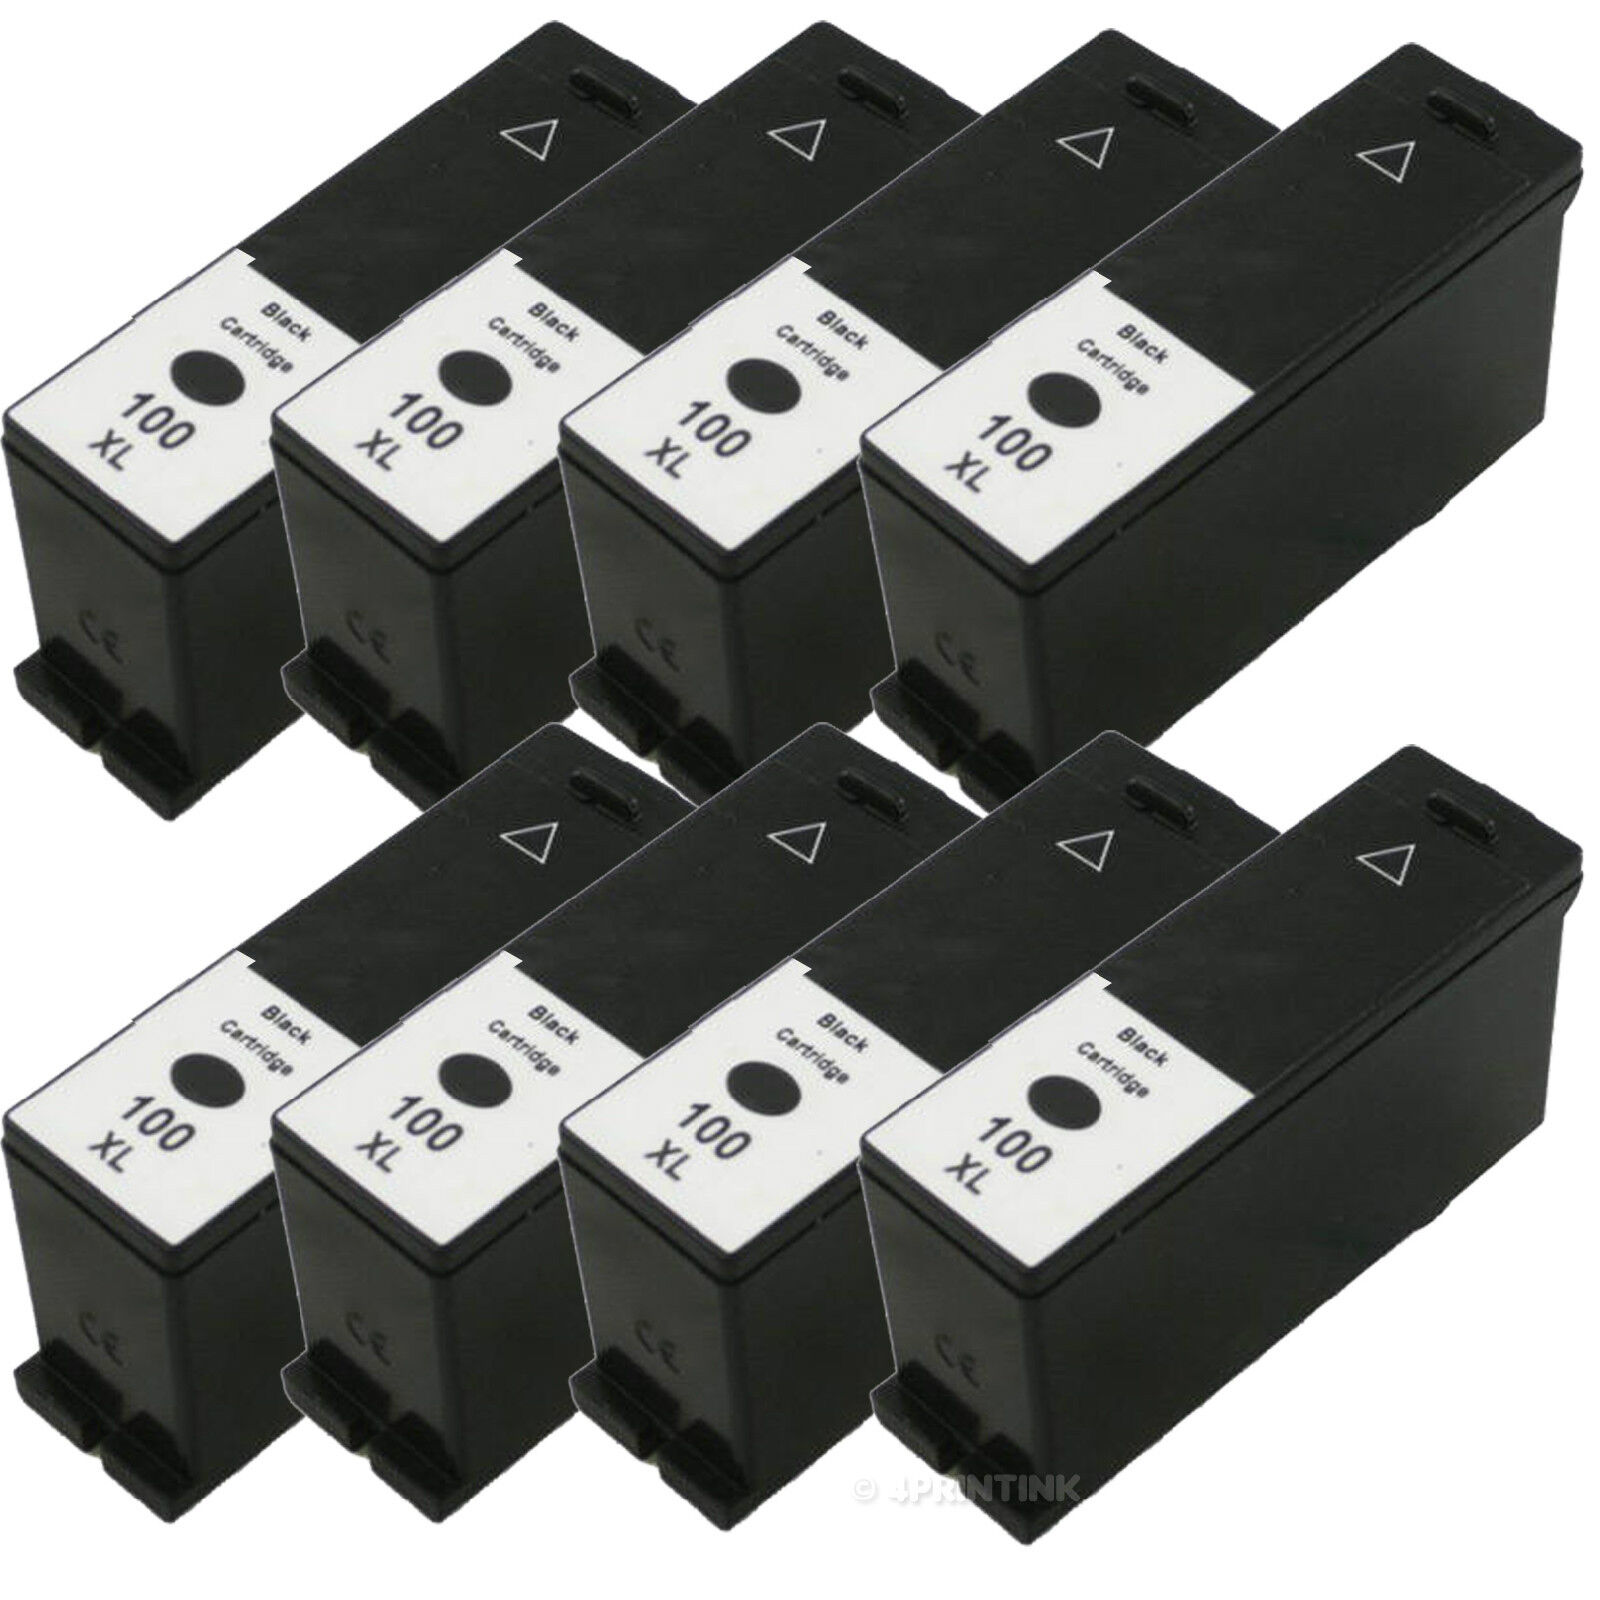 8x 100XL Black Ink For Lexmark 100XL Interact S605 Interpret S405 Intuition S505